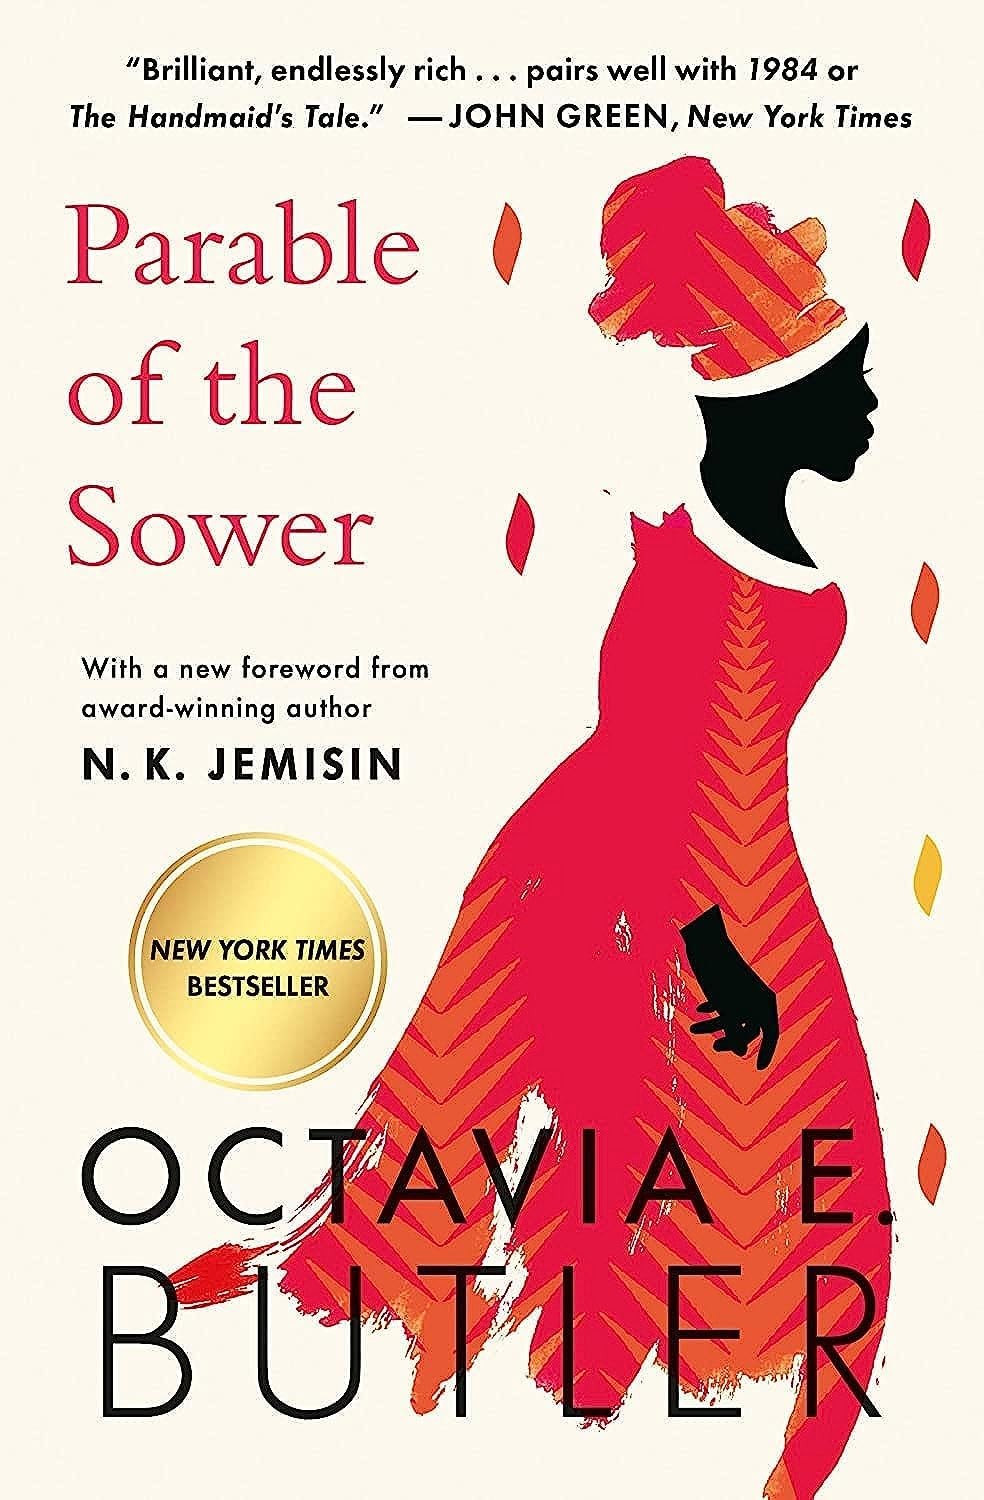 The cover of Parable of the Sower by Octavia E. Butler, with a blurb from John Green saying, "Brilliant, endlessly rich... pairs well with 1984 or The Handmaid's Tale." The cover art shows a young black woman dressed in pink/orange. The background is white. 